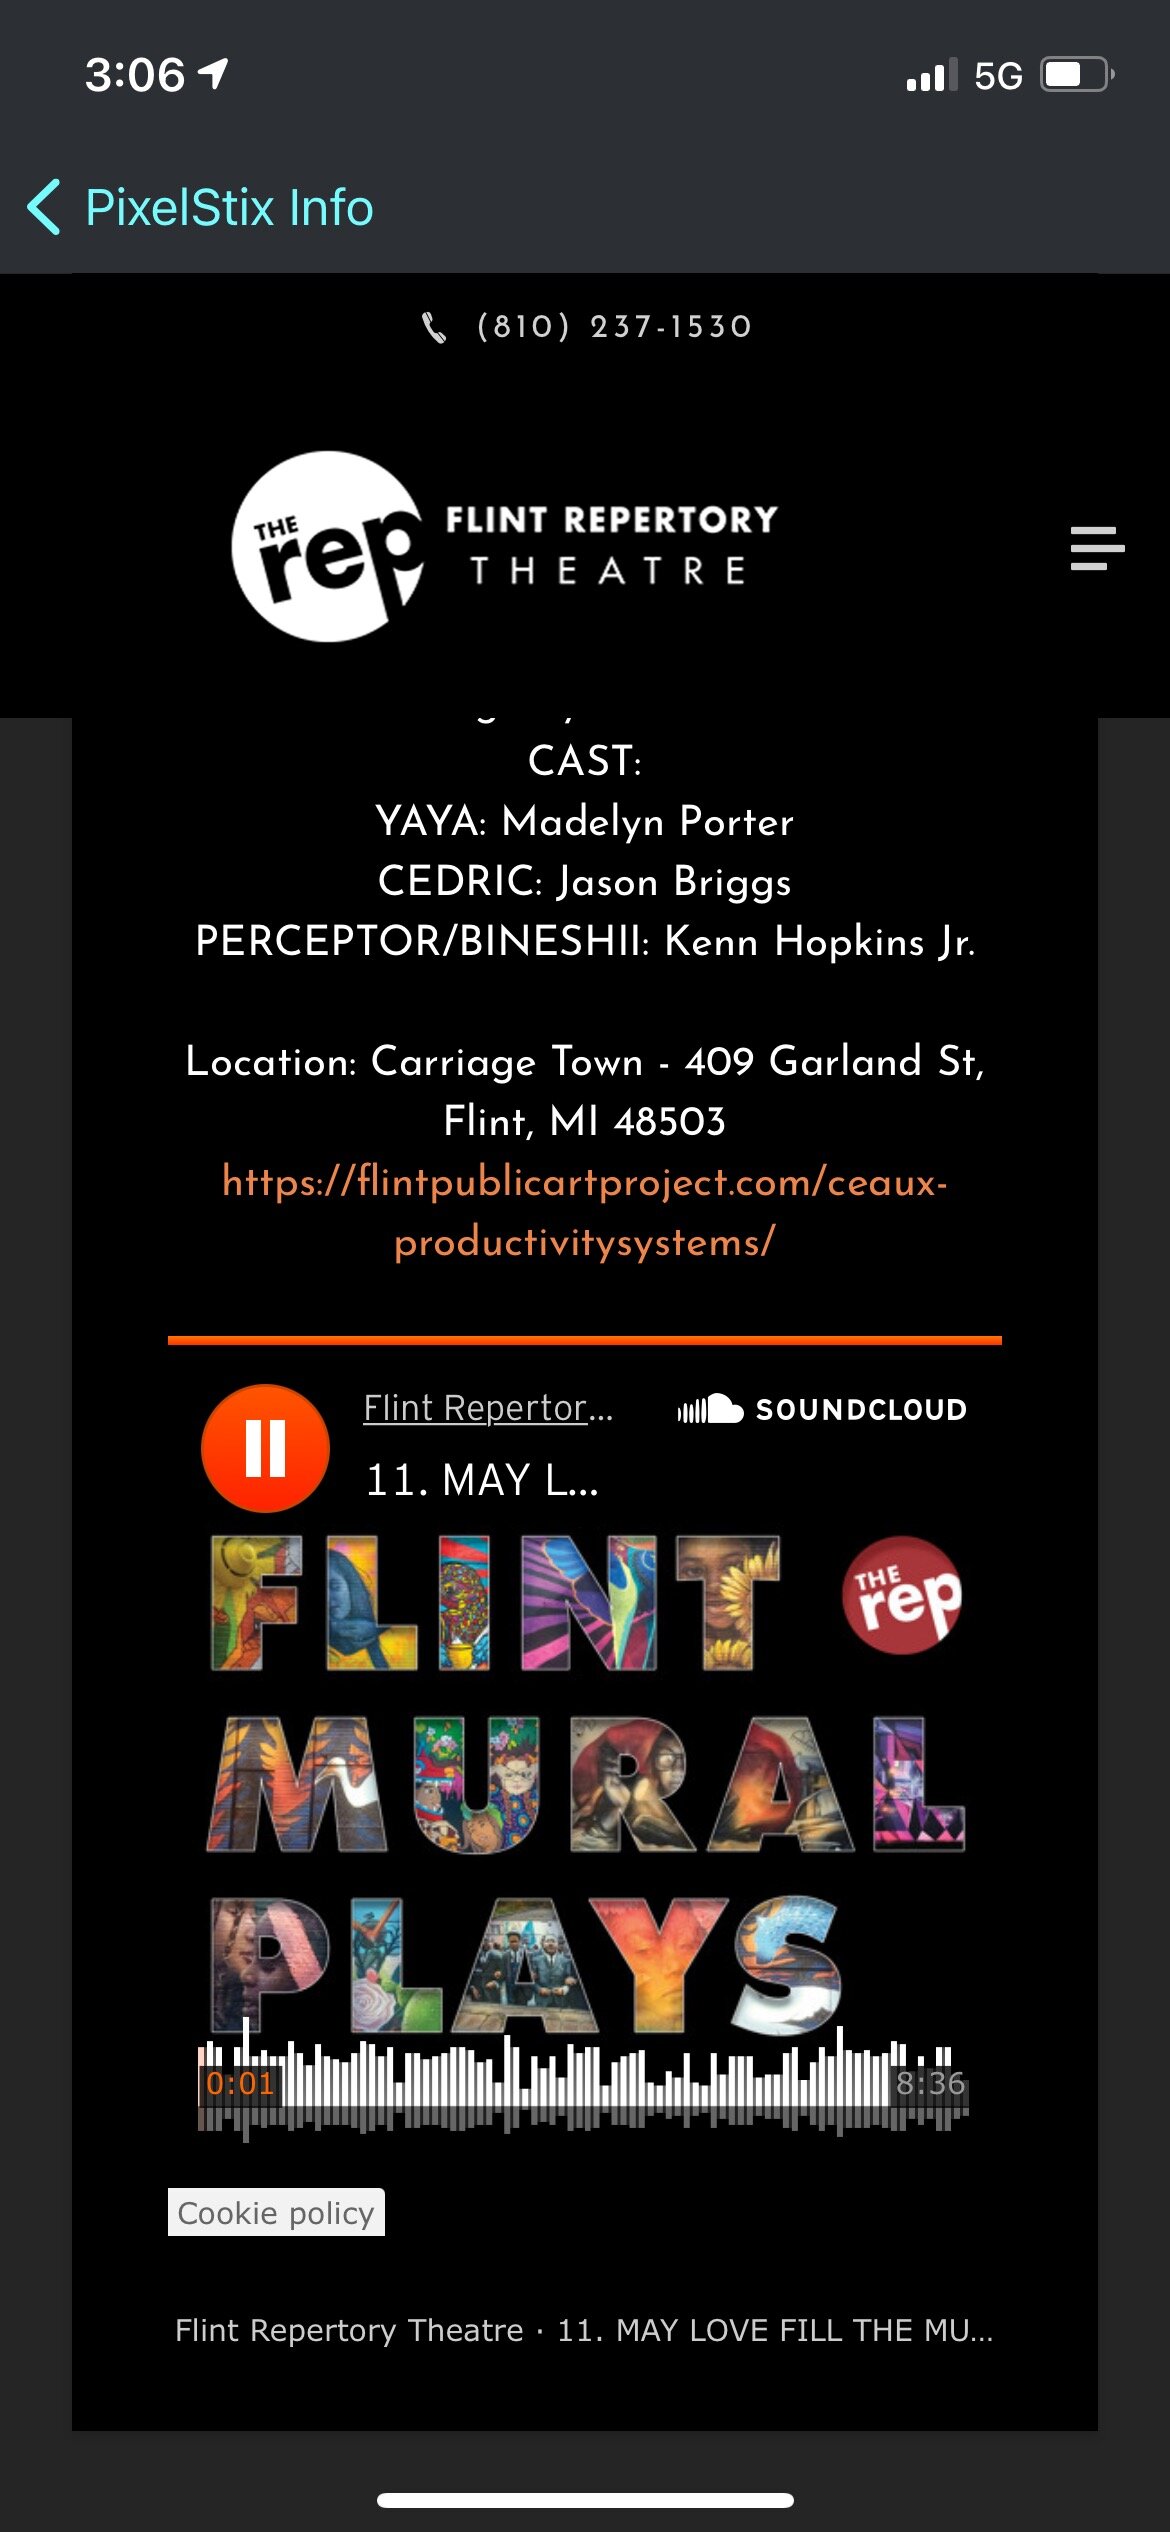 Information about Flint Mural Plays is available in the PixelStix app.